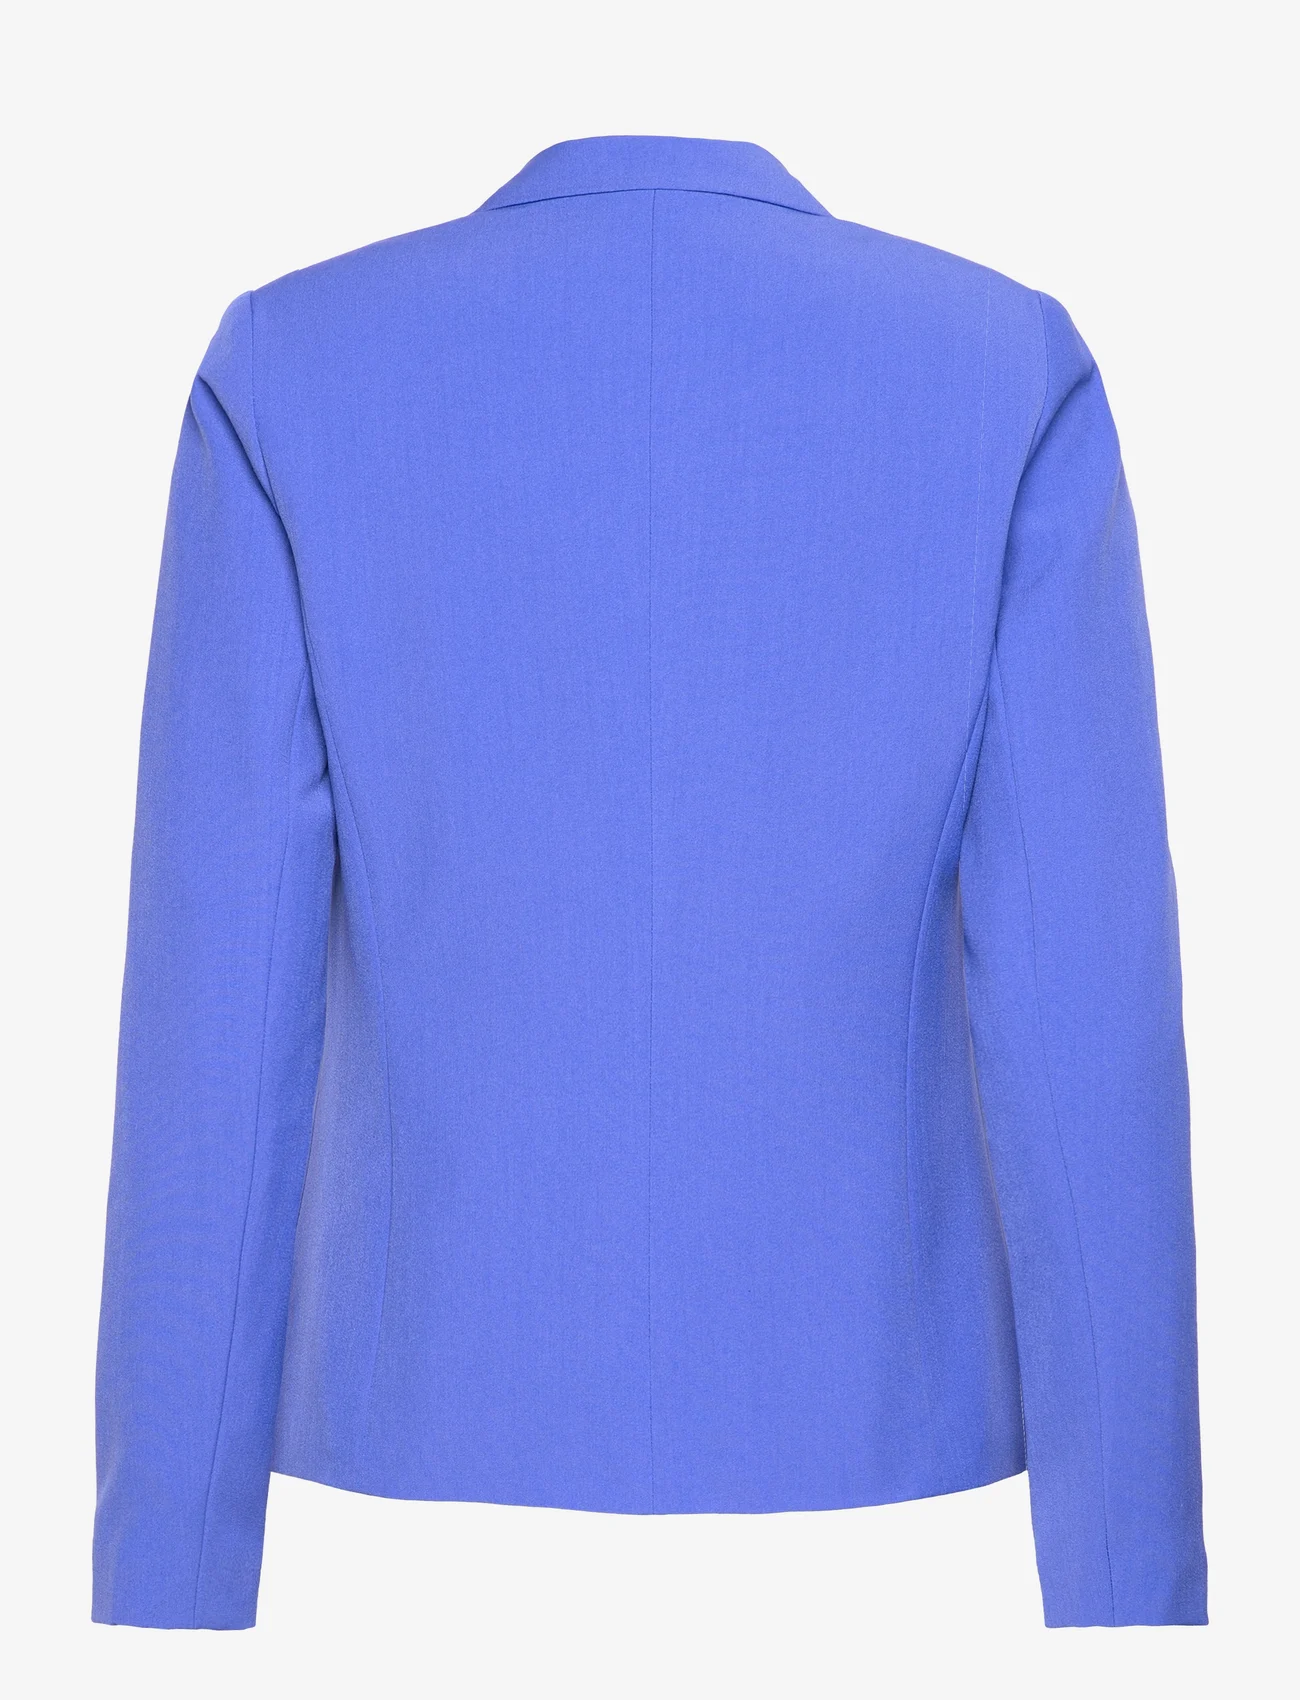 Brandtex - Blazer - party wear at outlet prices - clear blue - 1